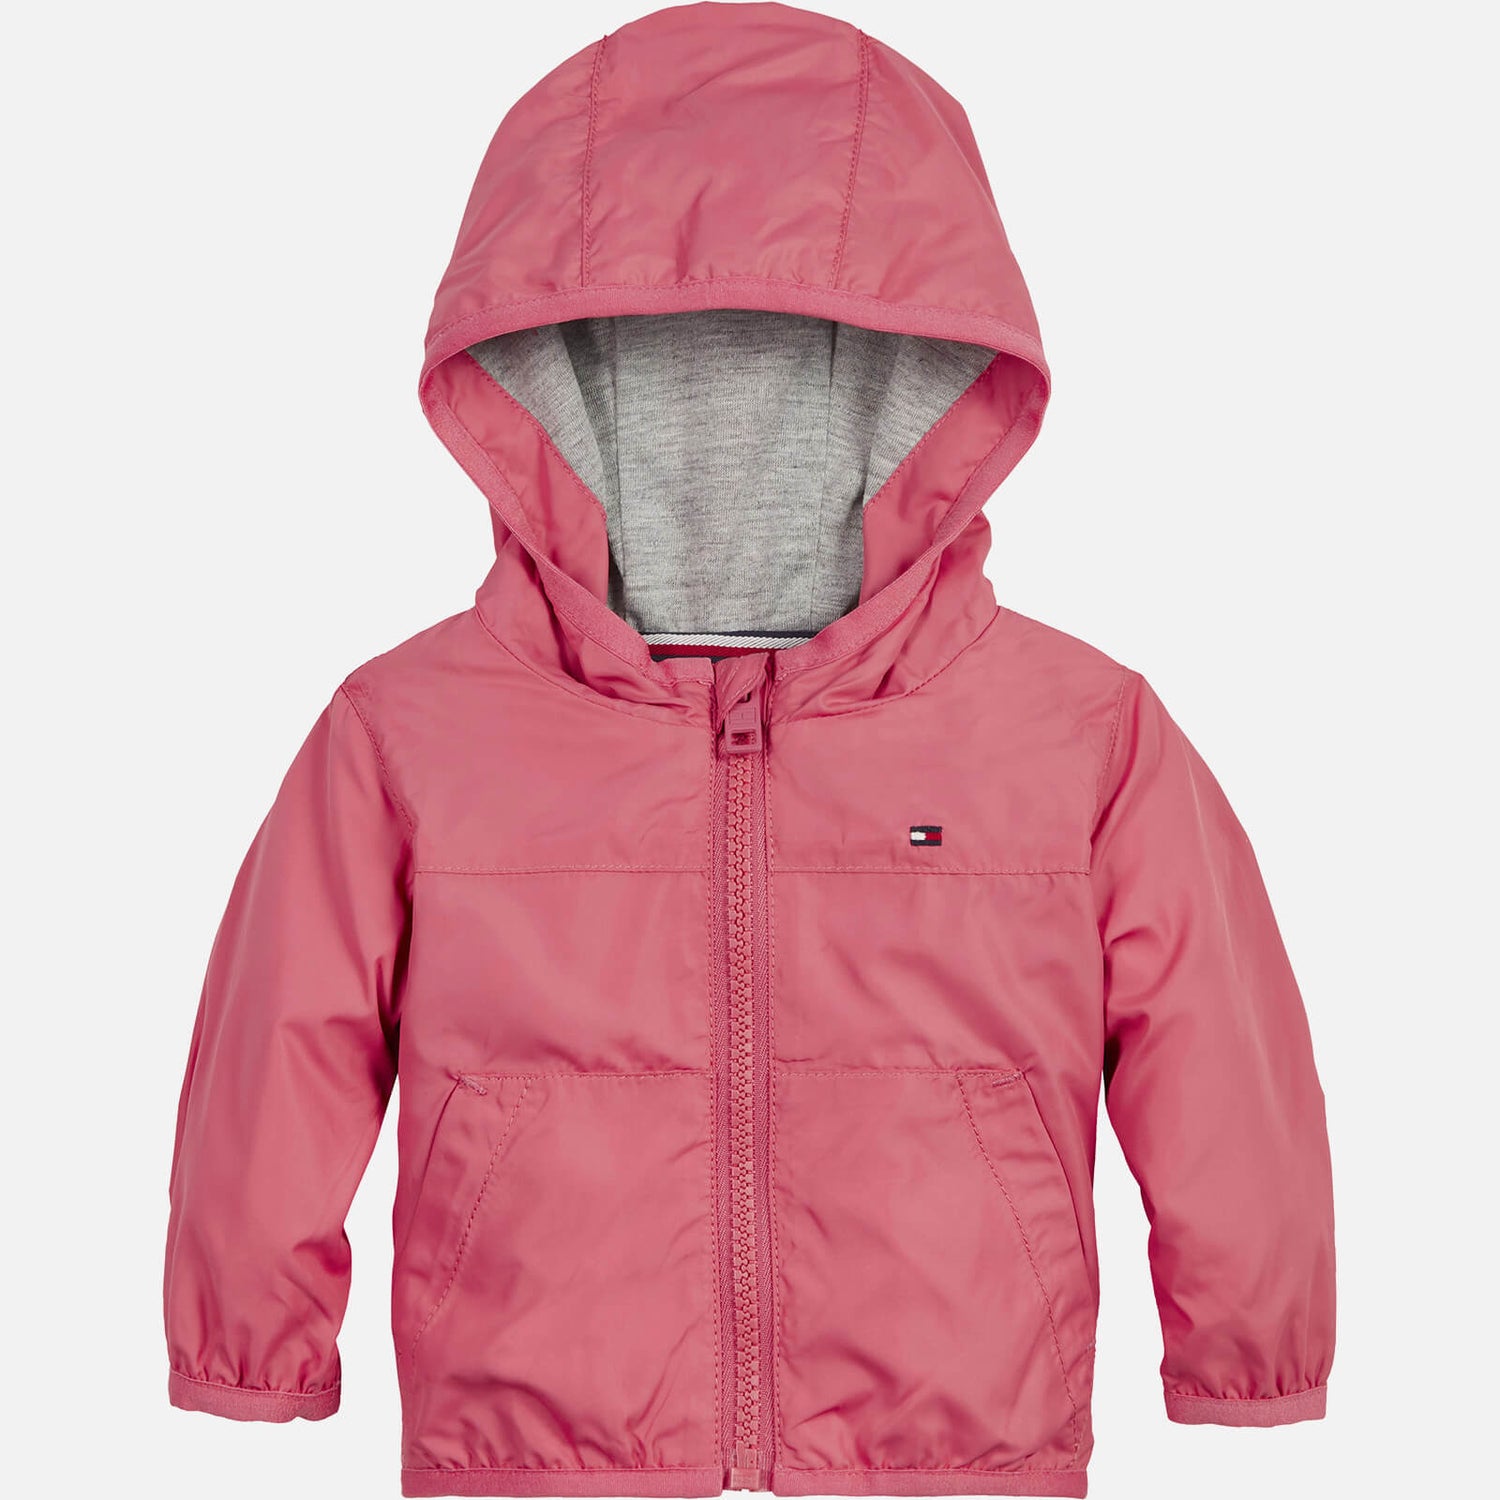 Tommy Hilfiger Babys' Baby Colorblock Jacket - Deep Watermelon - 6-9 months